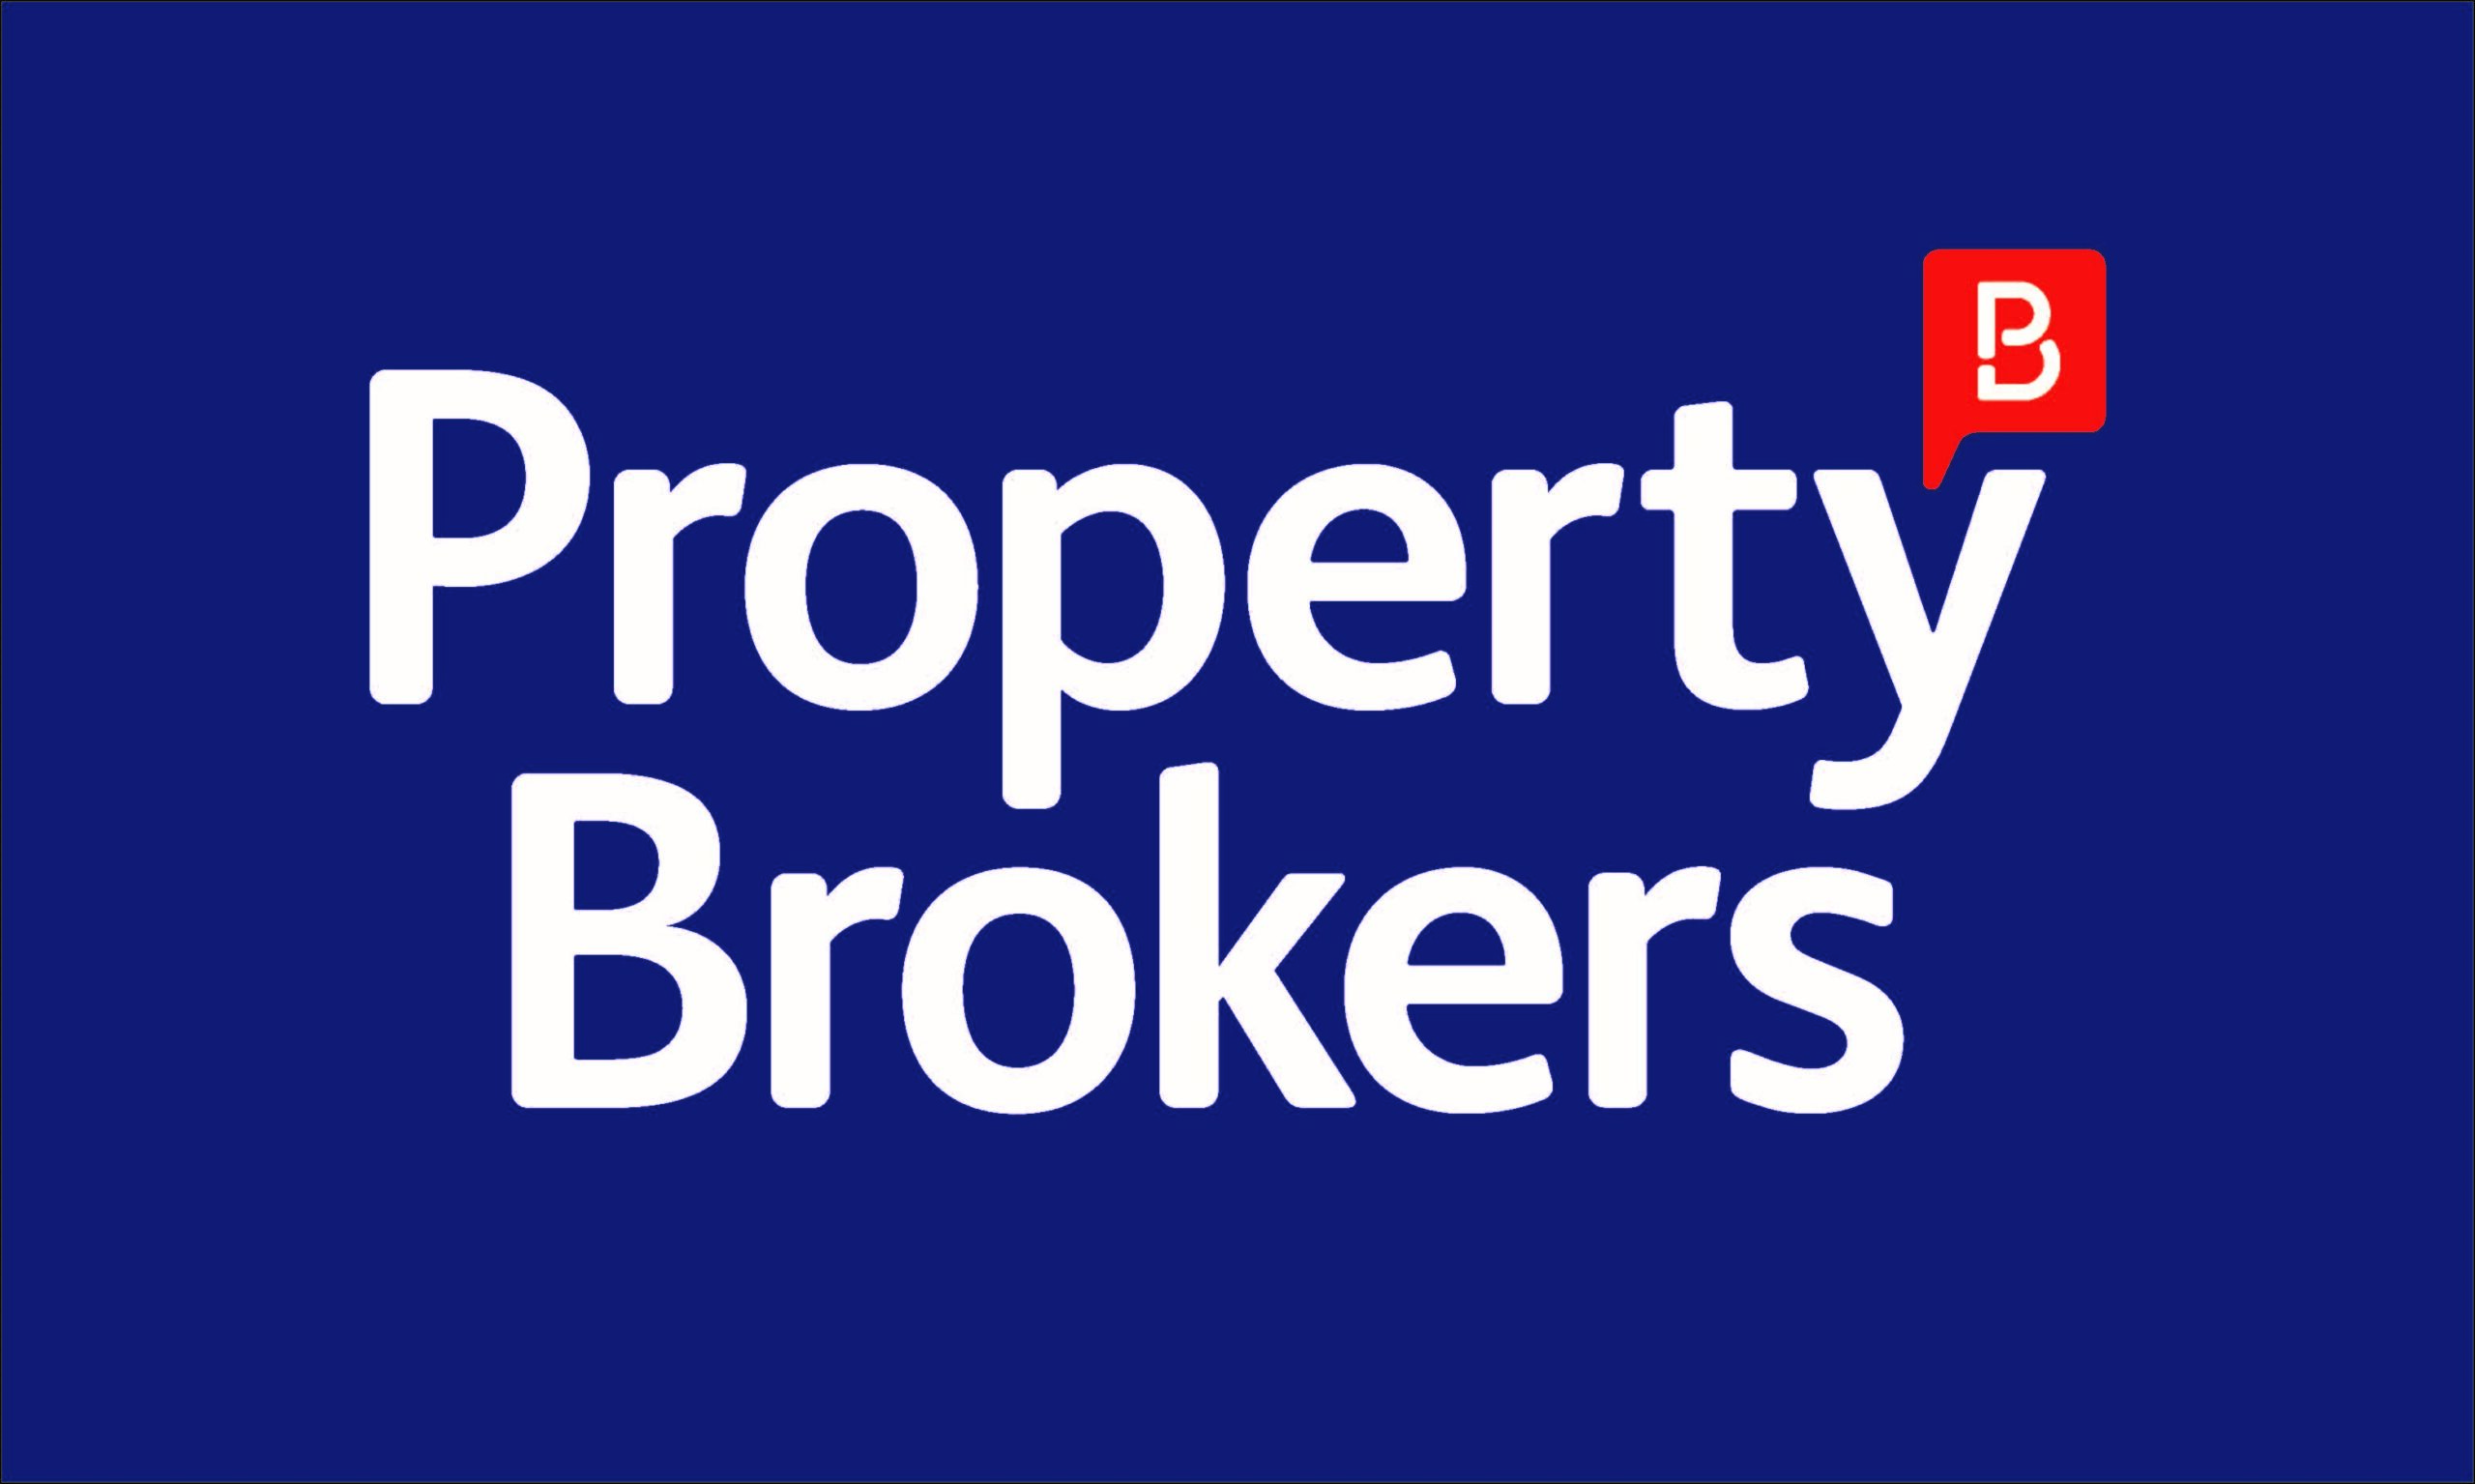 Property Brokers partners with RMH Consulting